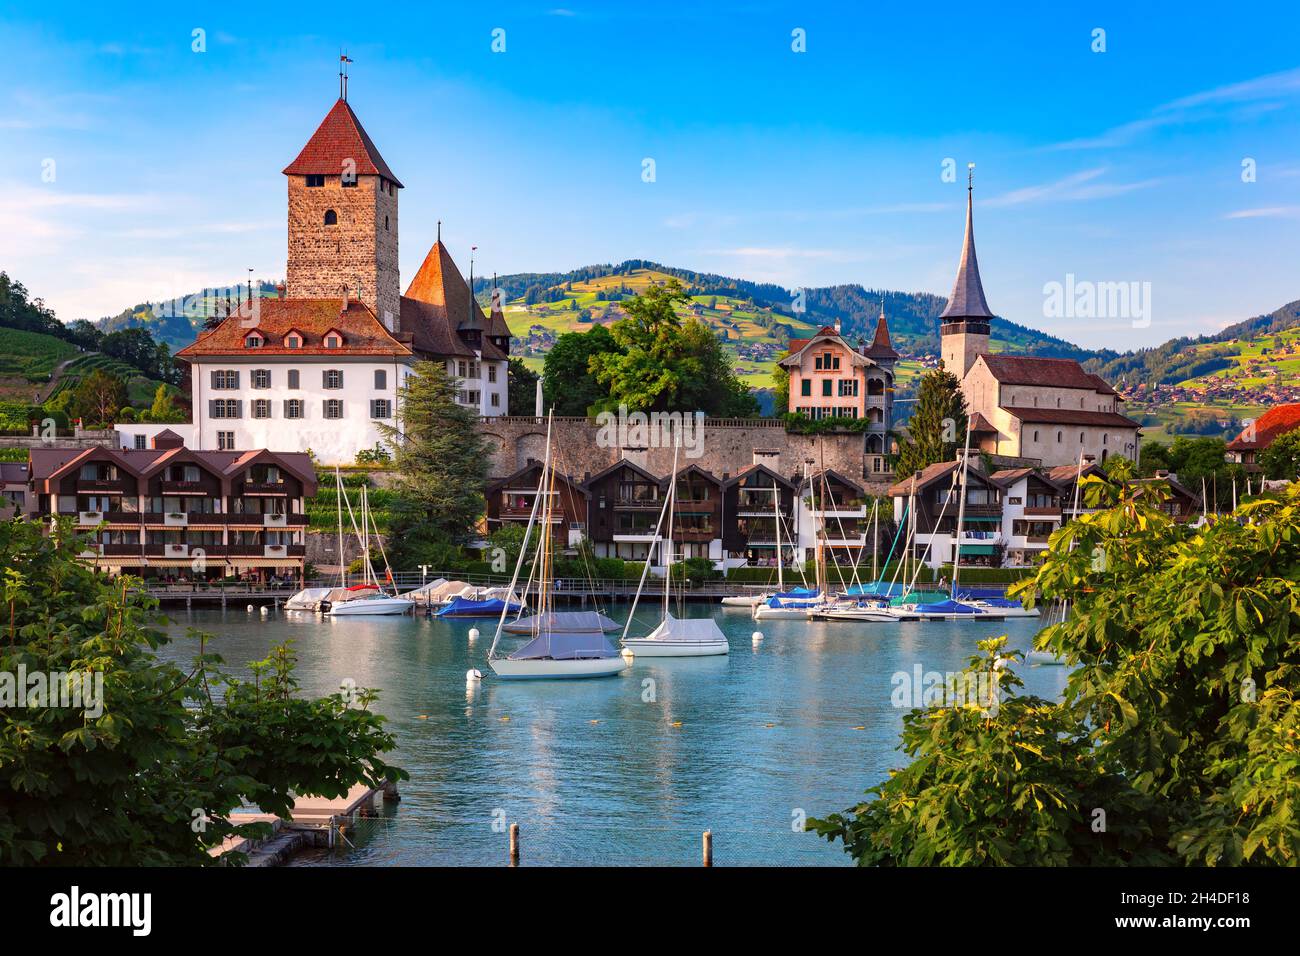 Spiez Church and Castle on the shore of Lake Thun in the Bernese Oberland region of the Swiss canton of Bern, Spiez, Switzerland. Stock Photo